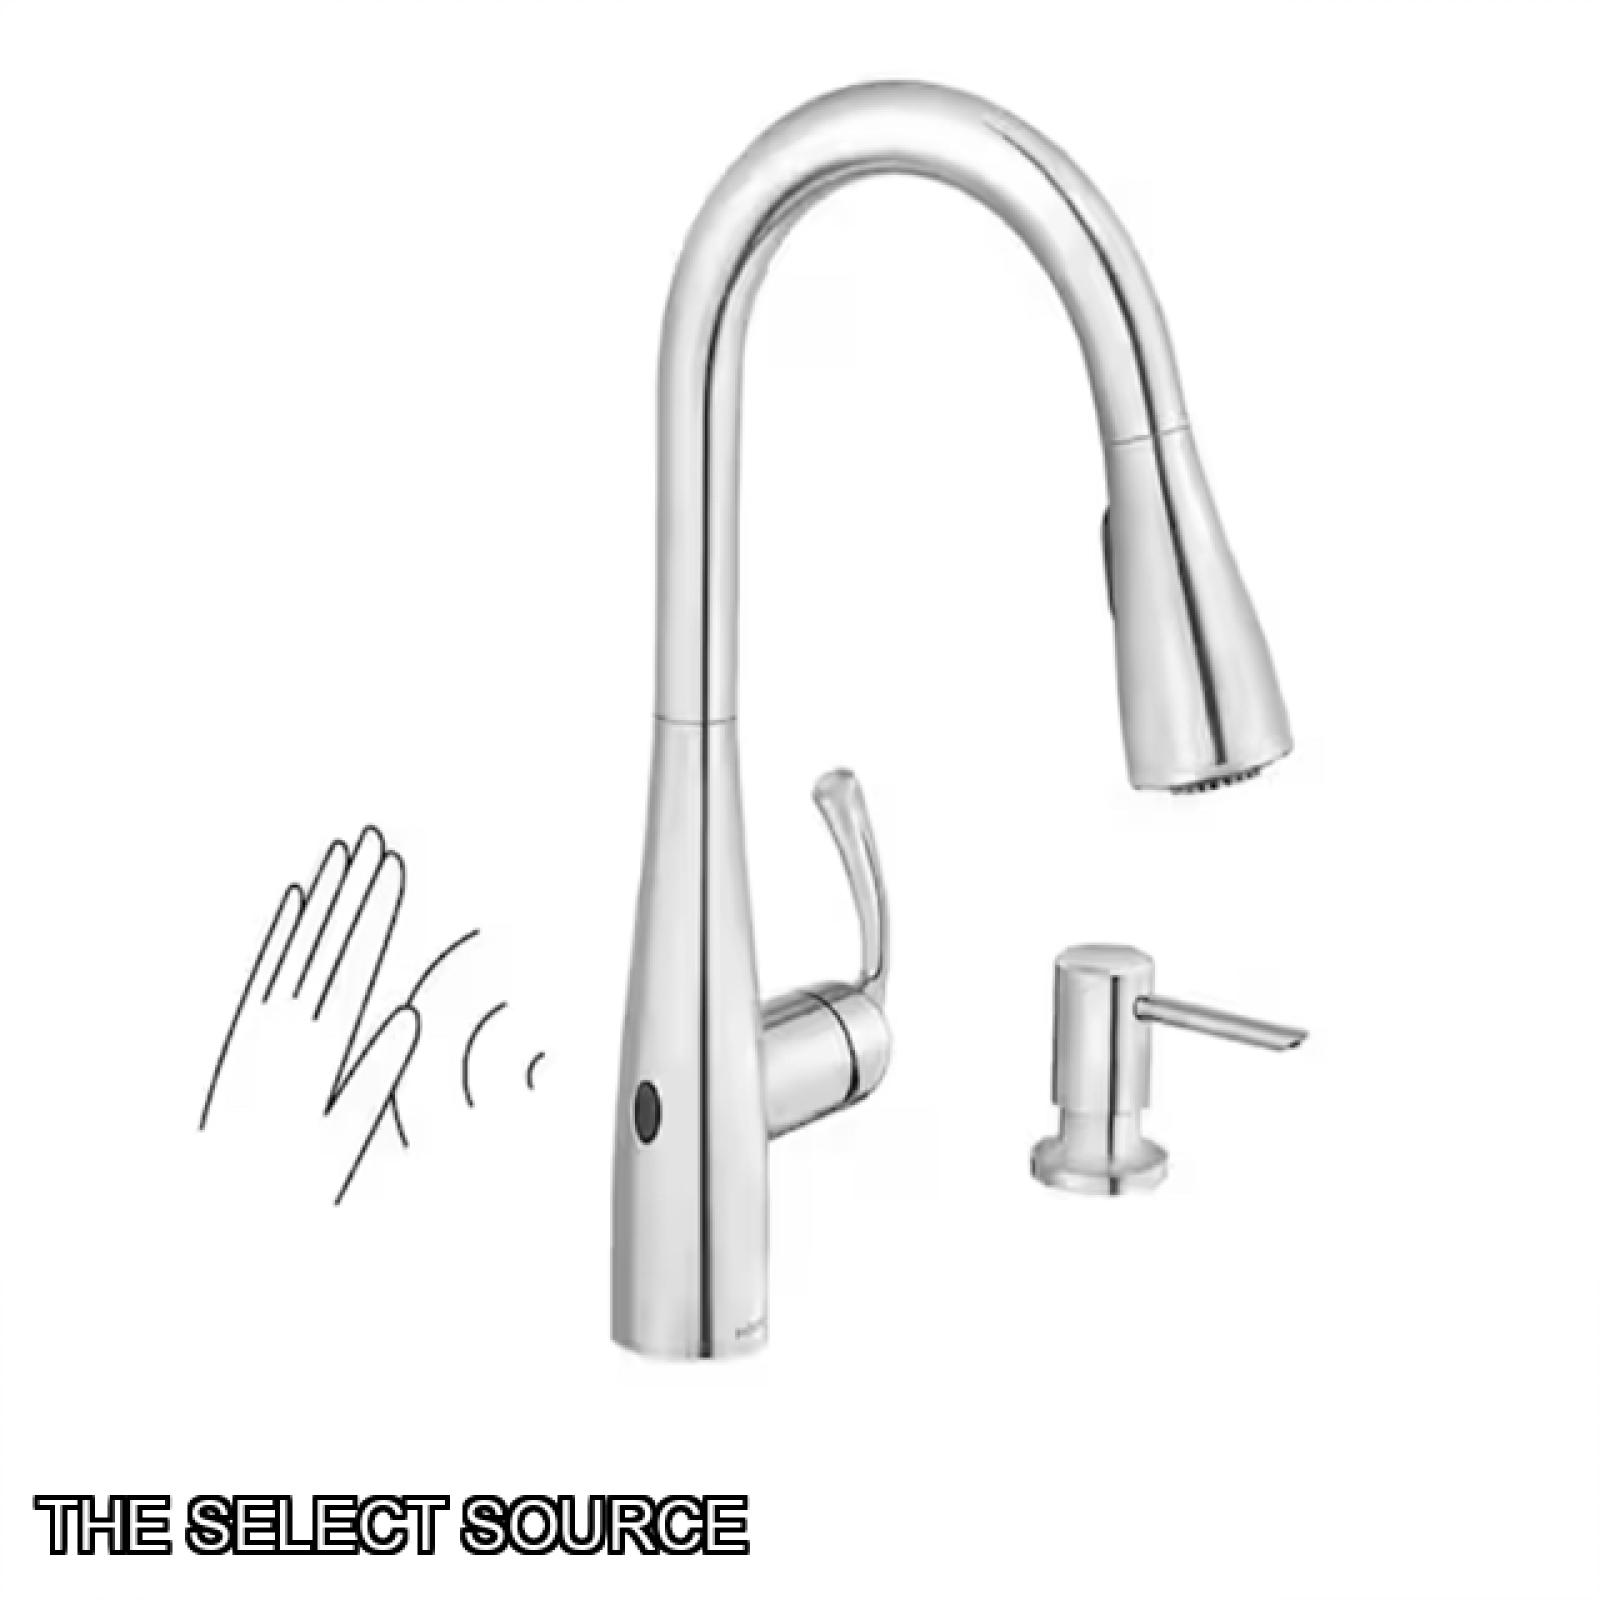 NEW! - MOEN Essie Touchless Single-Handle Pull-Down Sprayer Kitchen Faucet Chrome